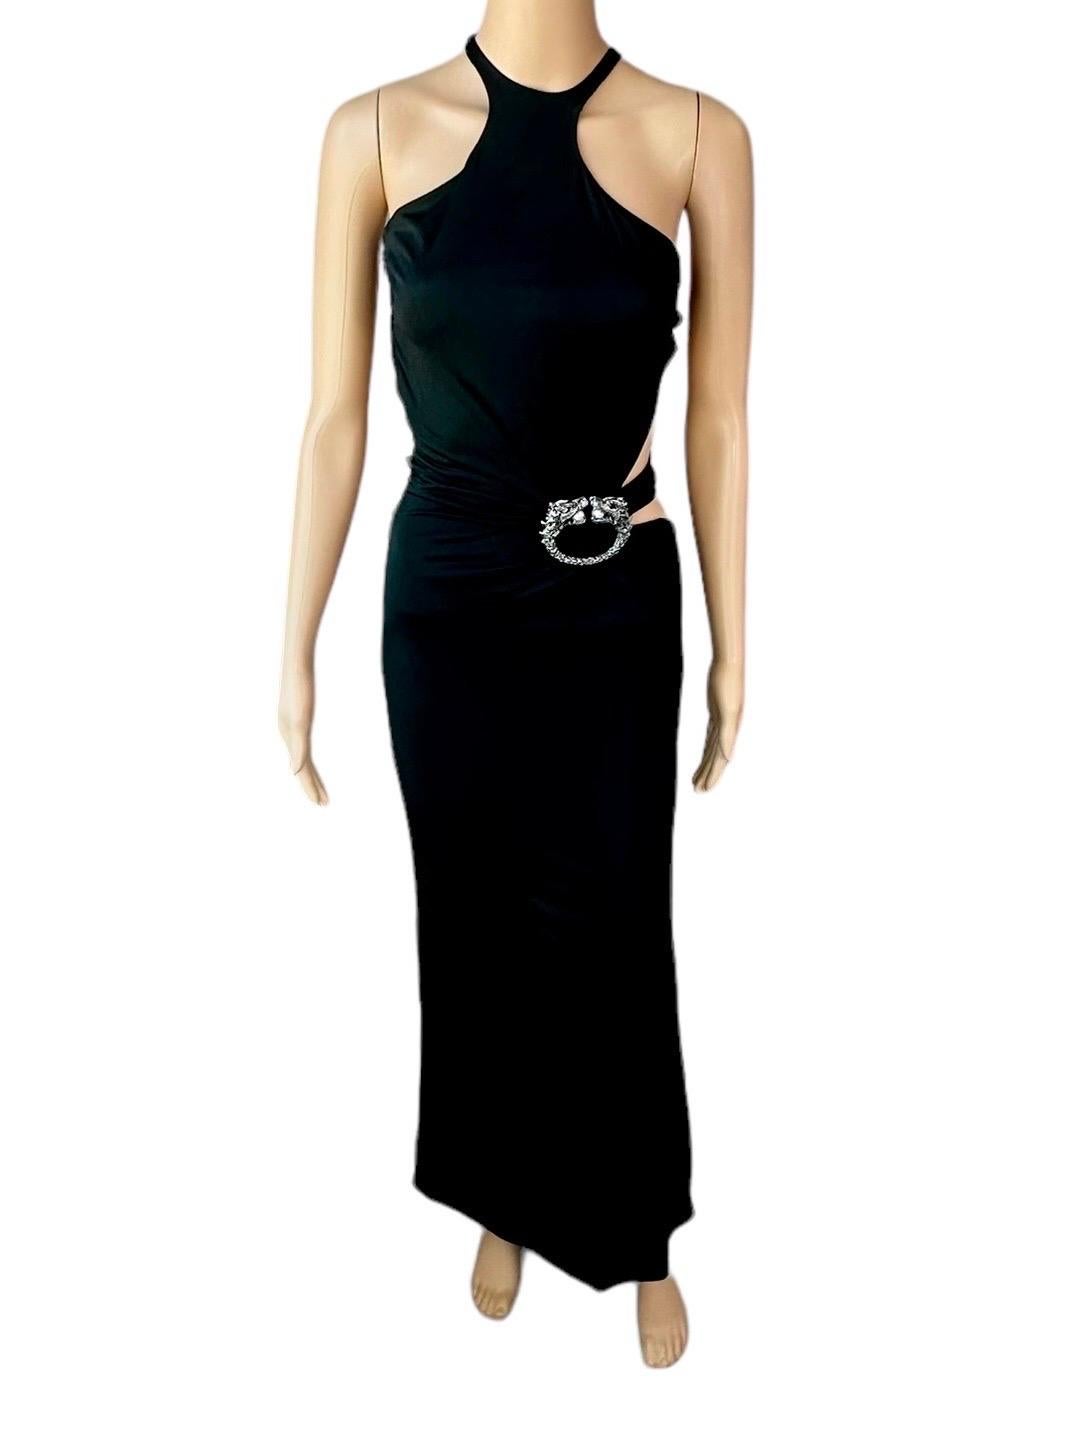 Tom Ford for Gucci F/W 2004 Embellished Plunging Cutout Black Evening Dress Gown 6